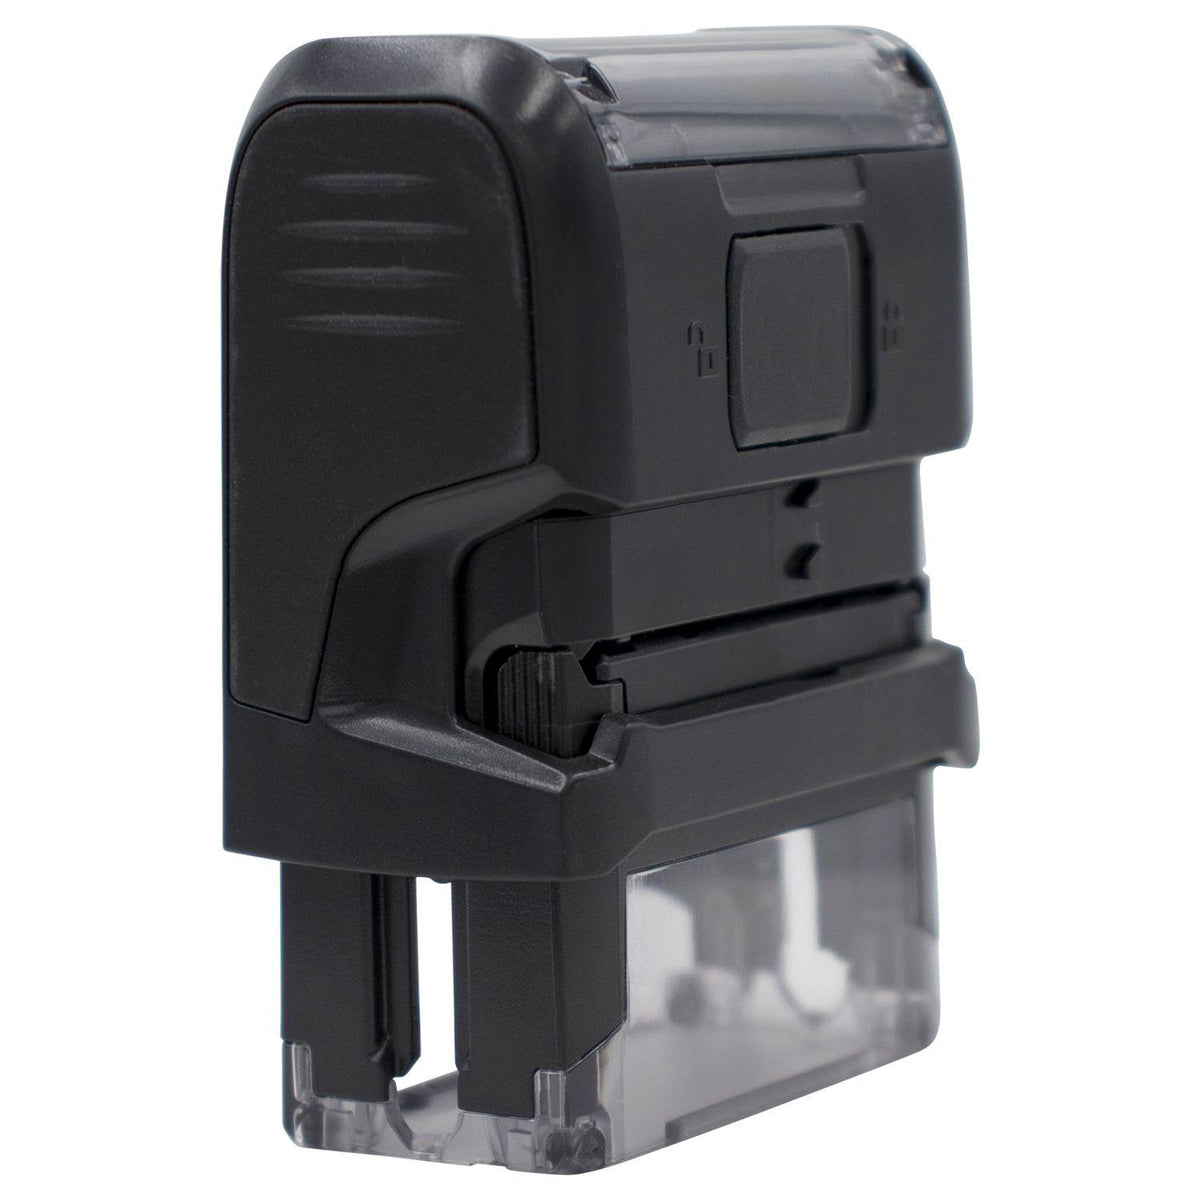 Self-Inking Covid-19 Stamp - Engineer Seal Stamps - Brand_Trodat, Impression Size_Small, Stamp Type_Self-Inking Stamp, Type of Use_Medical Office